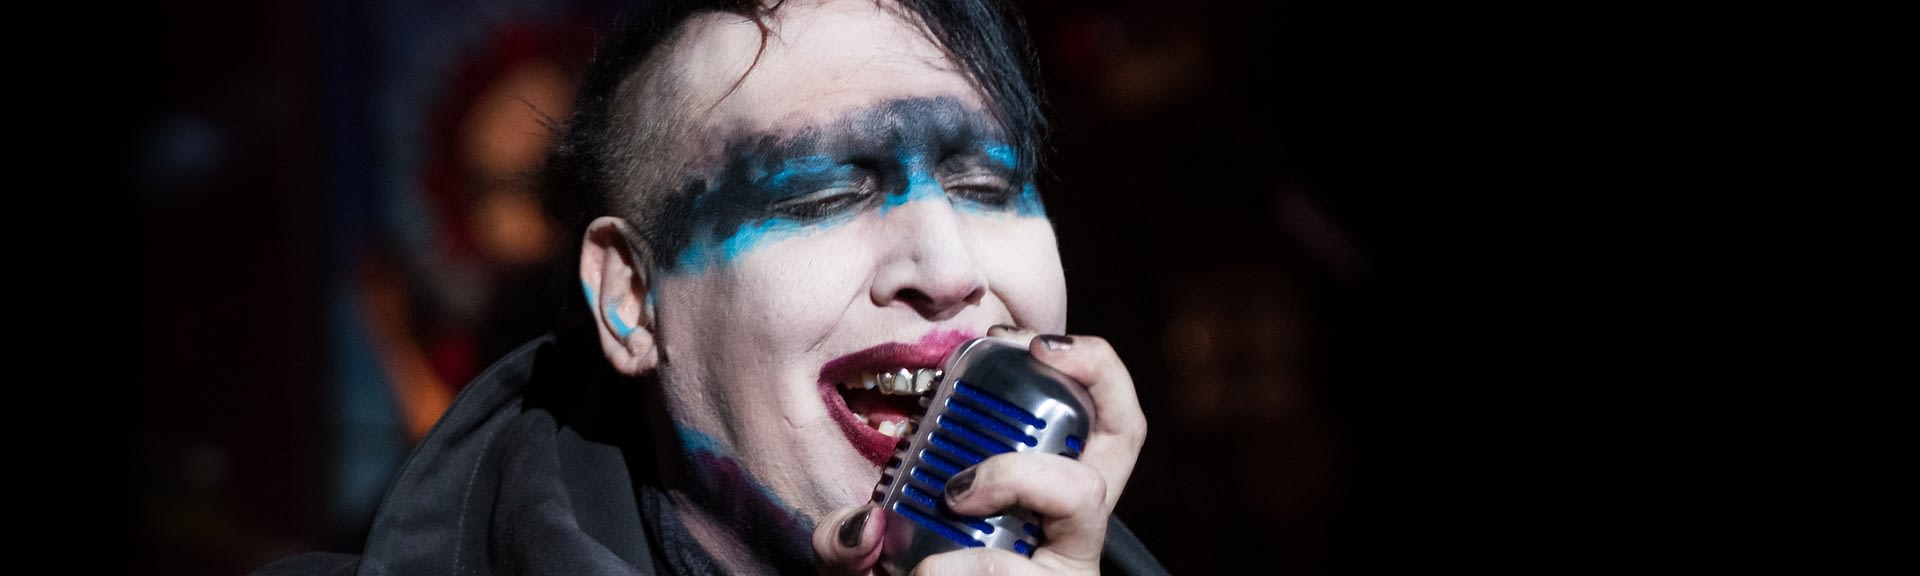 Marilyn Manson is Coming to The Joe Rogan Experience